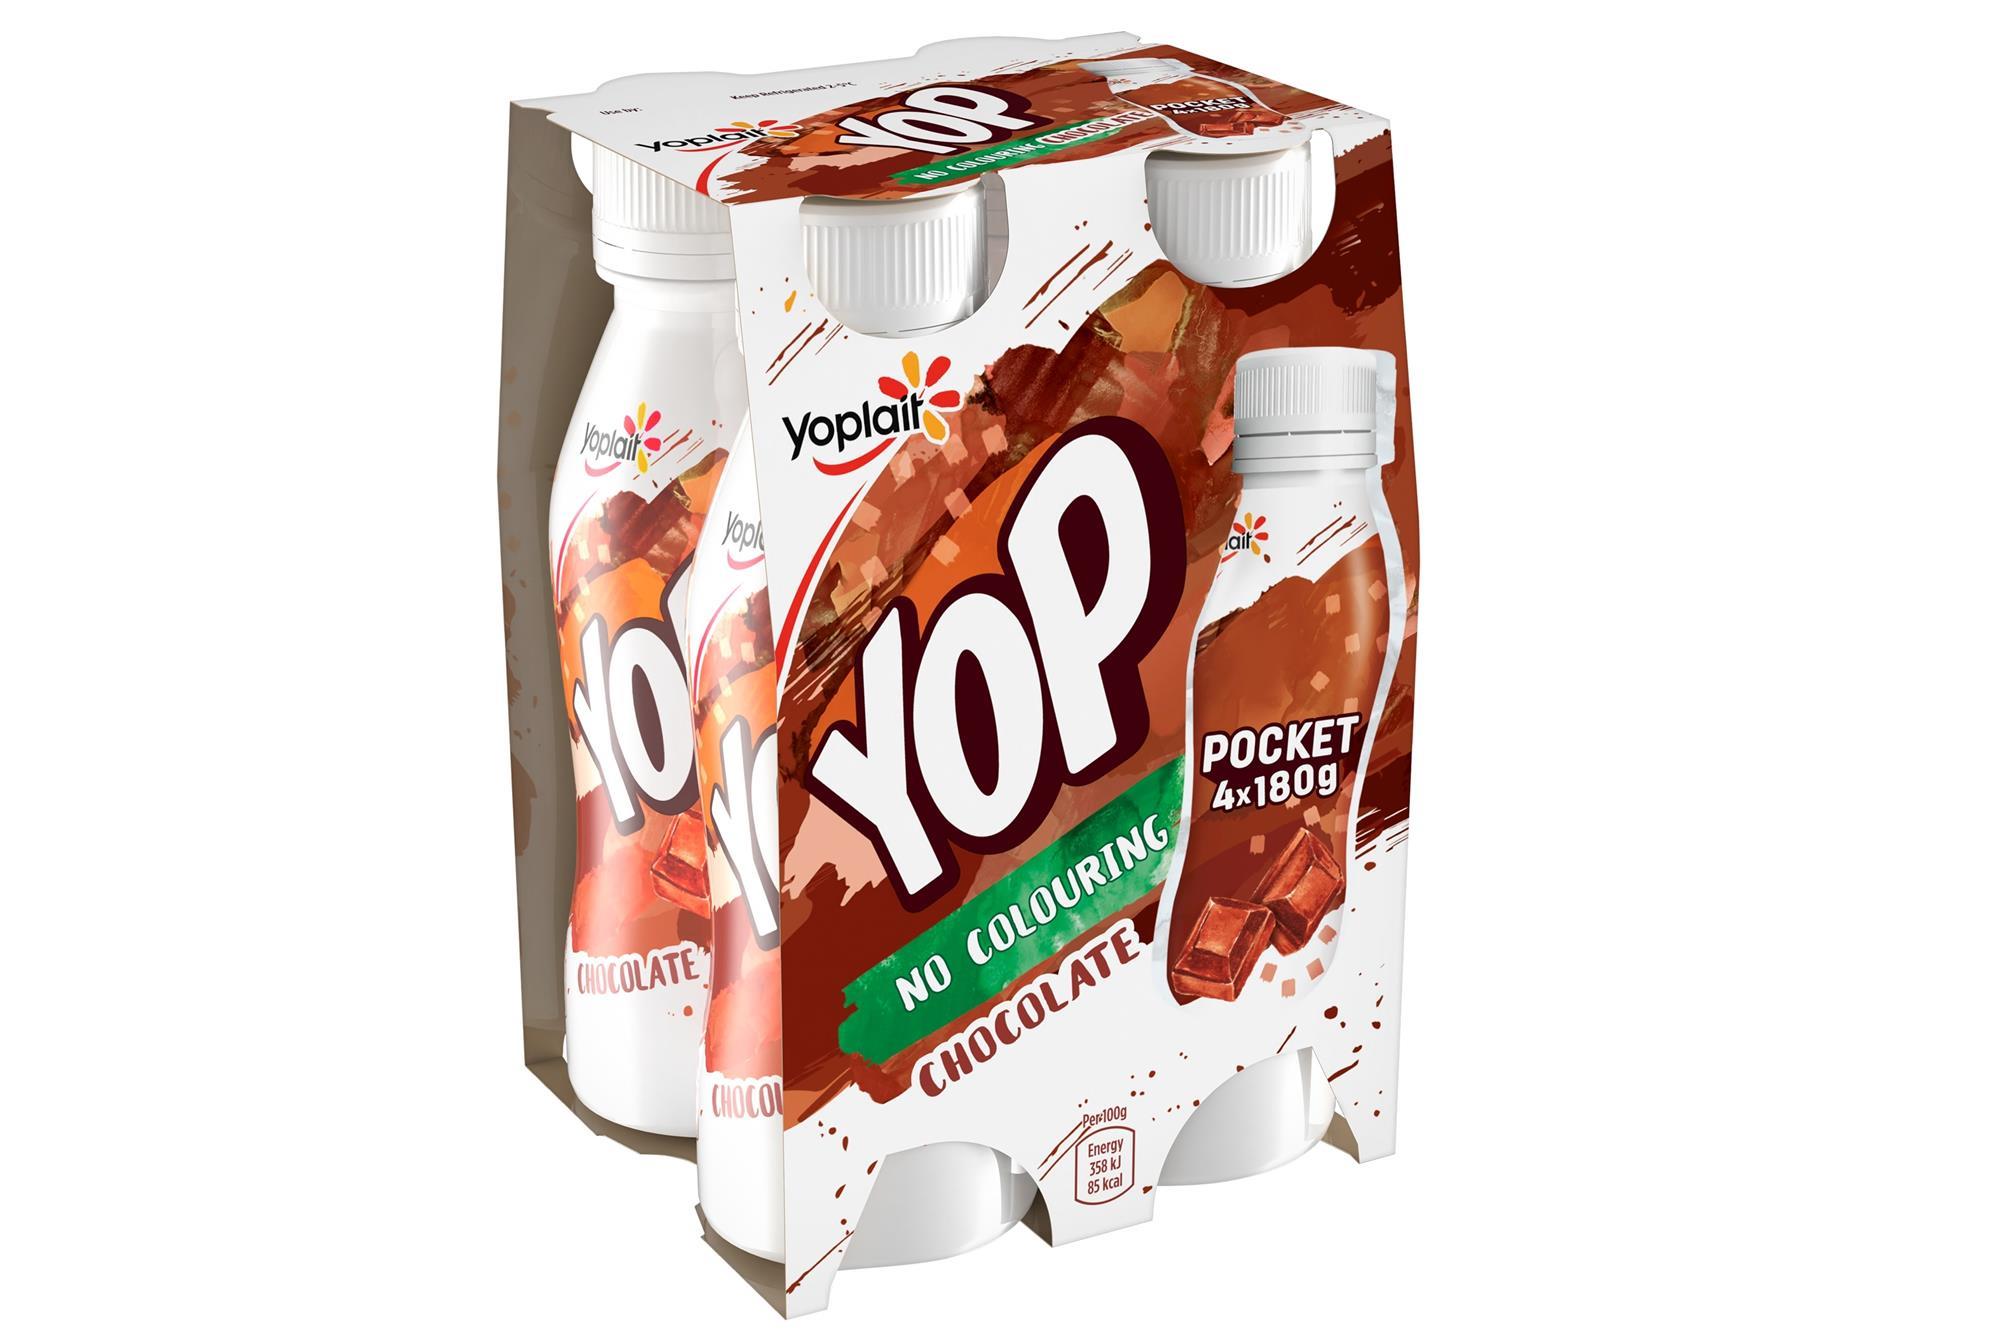 Yoplait unveils new Yop chocolate variant as a 'permissible treat